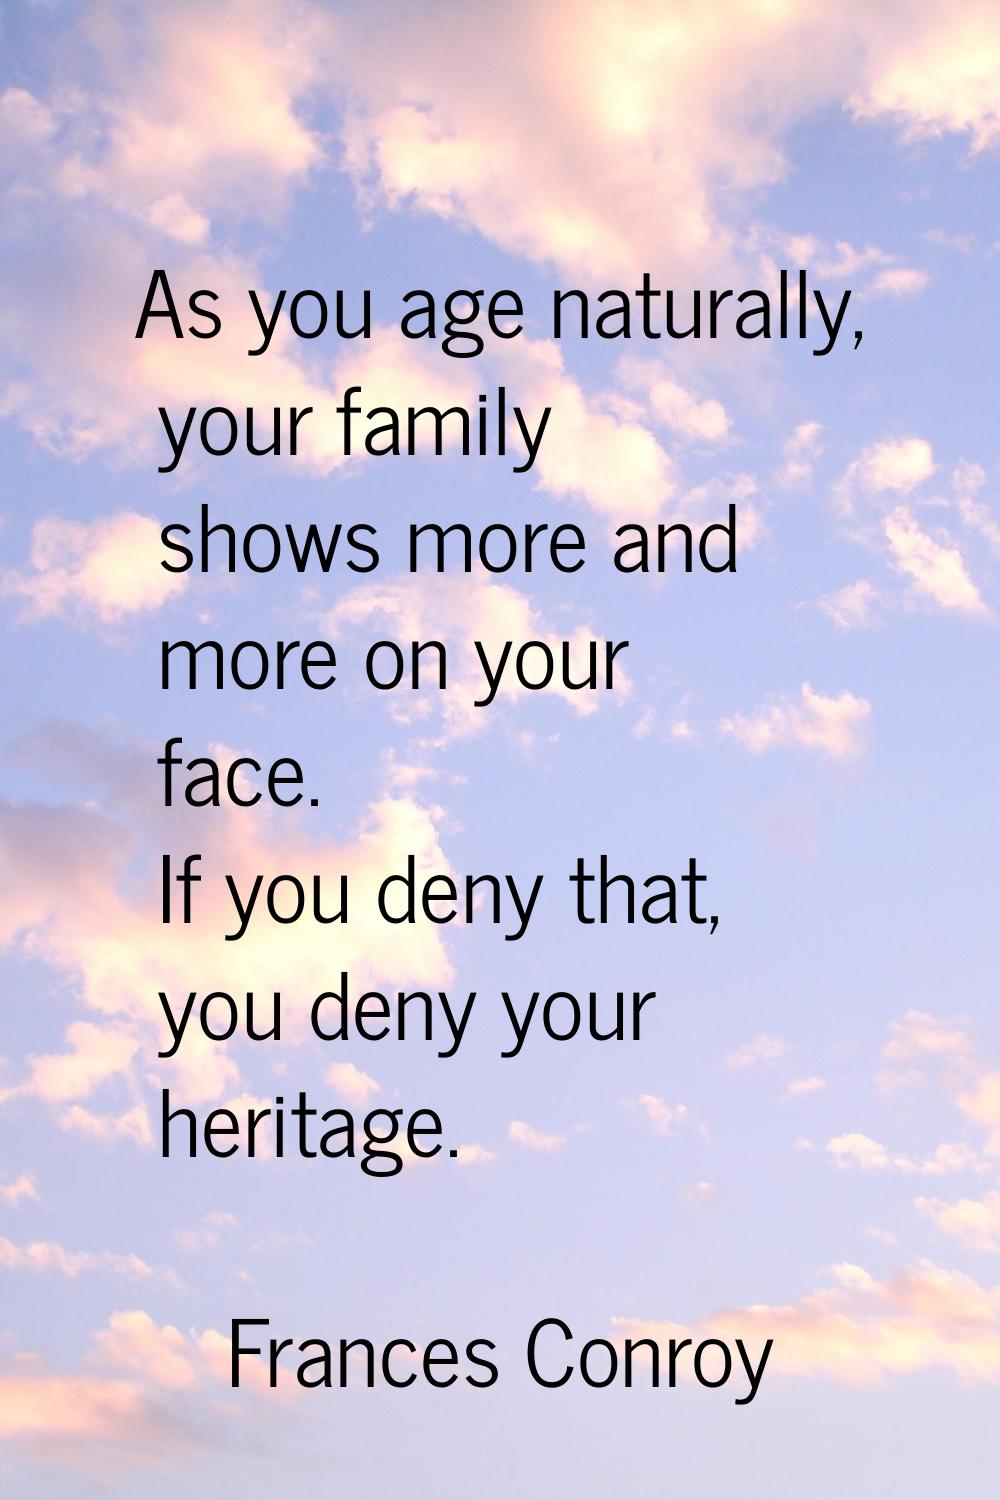 As you age naturally, your family shows more and more on your face. If you deny that, you deny your